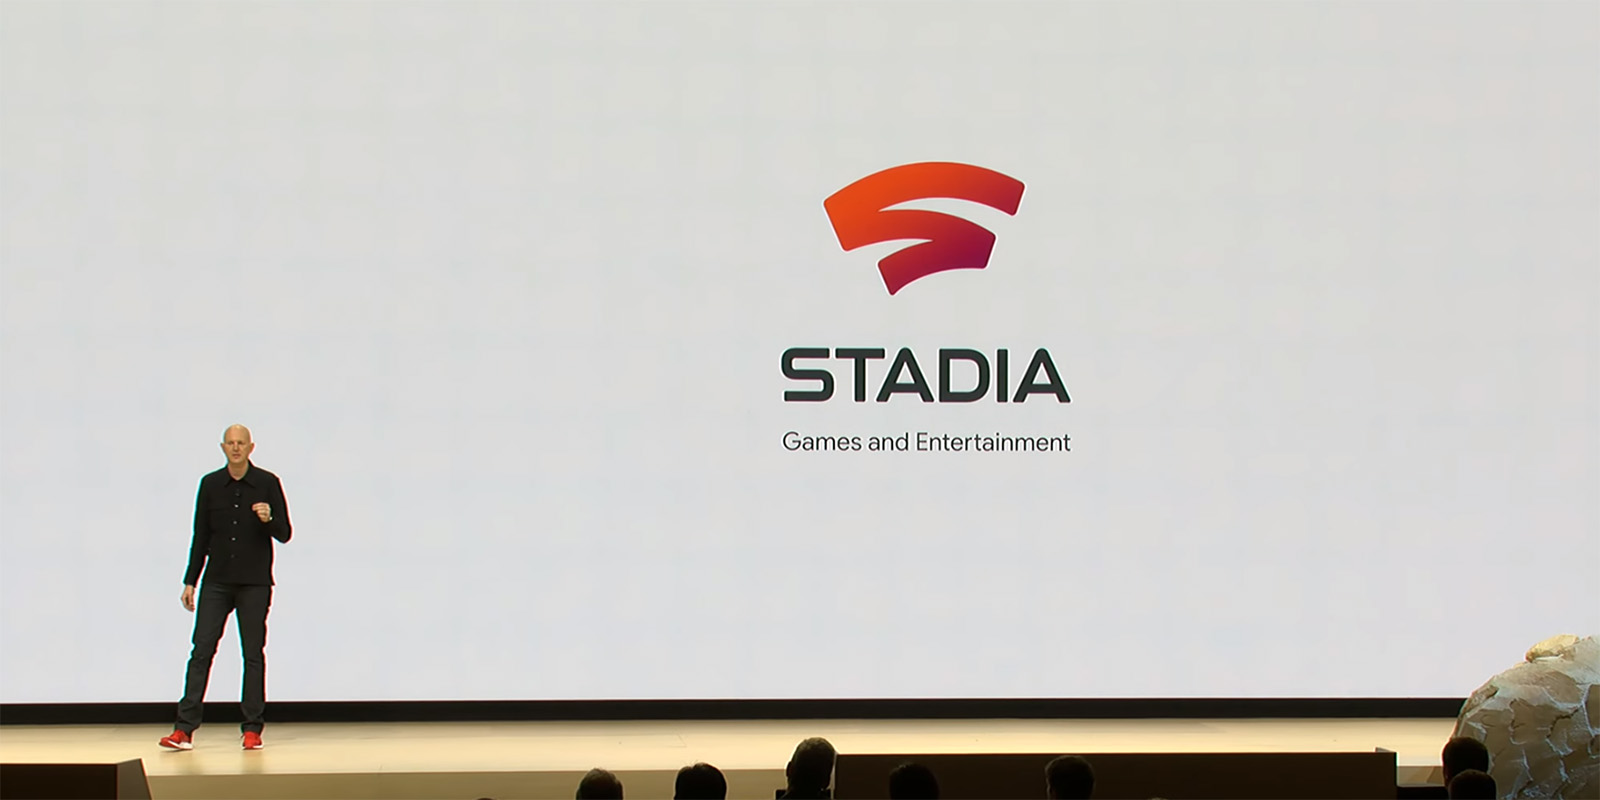 Stadia Games and Entertainment